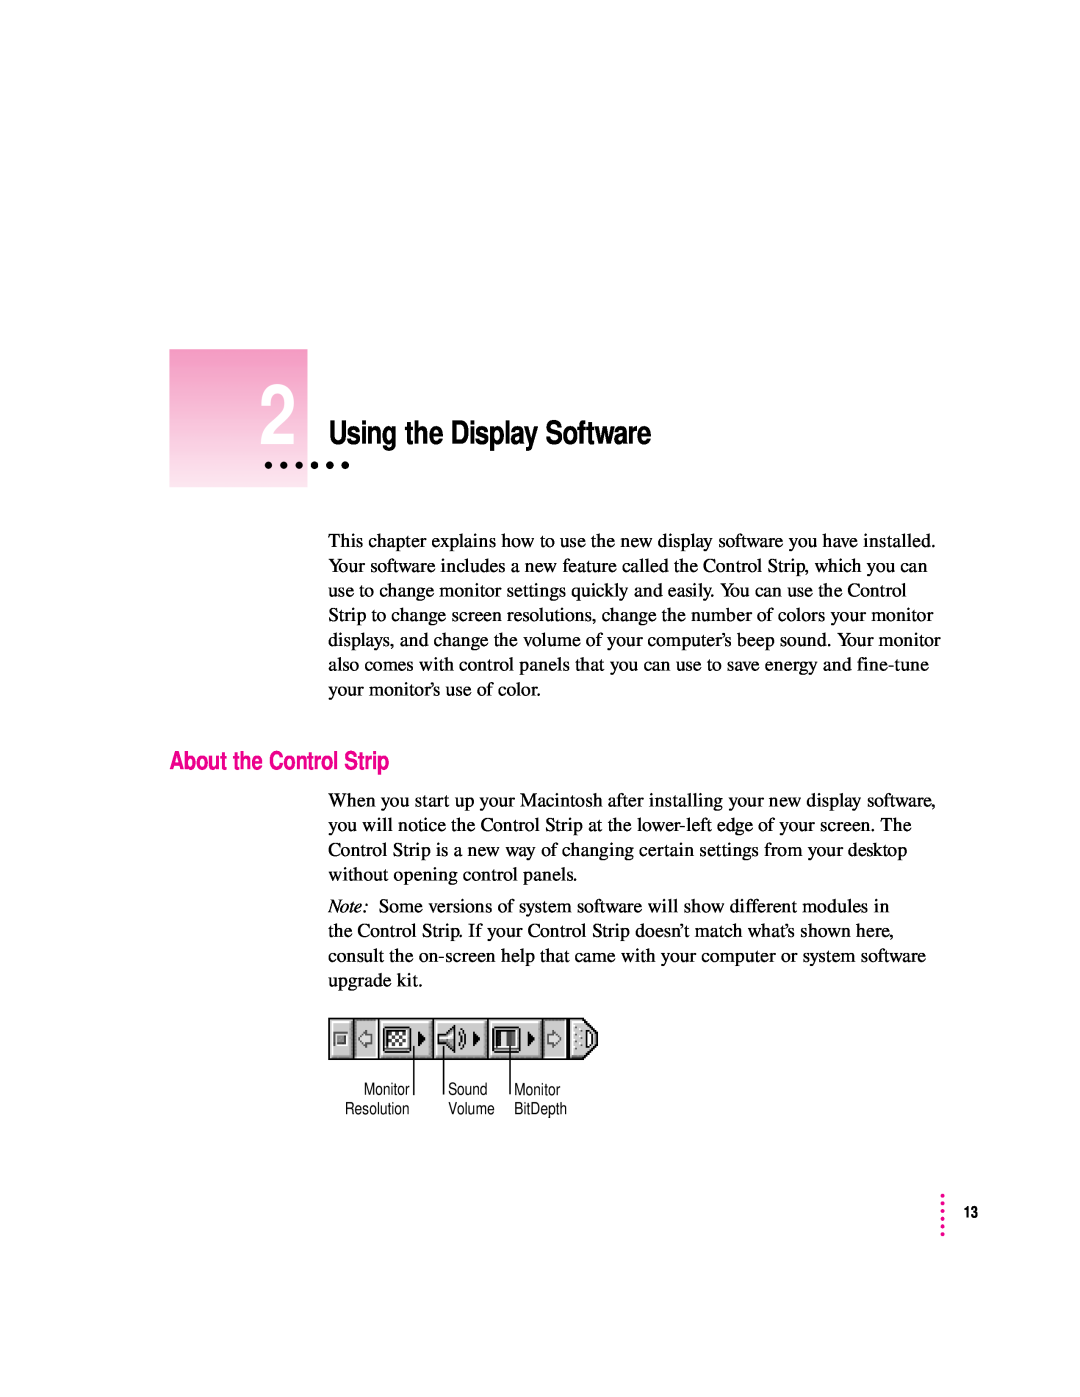 Apple 20Display manual Using the Display Software, About the Control Strip 